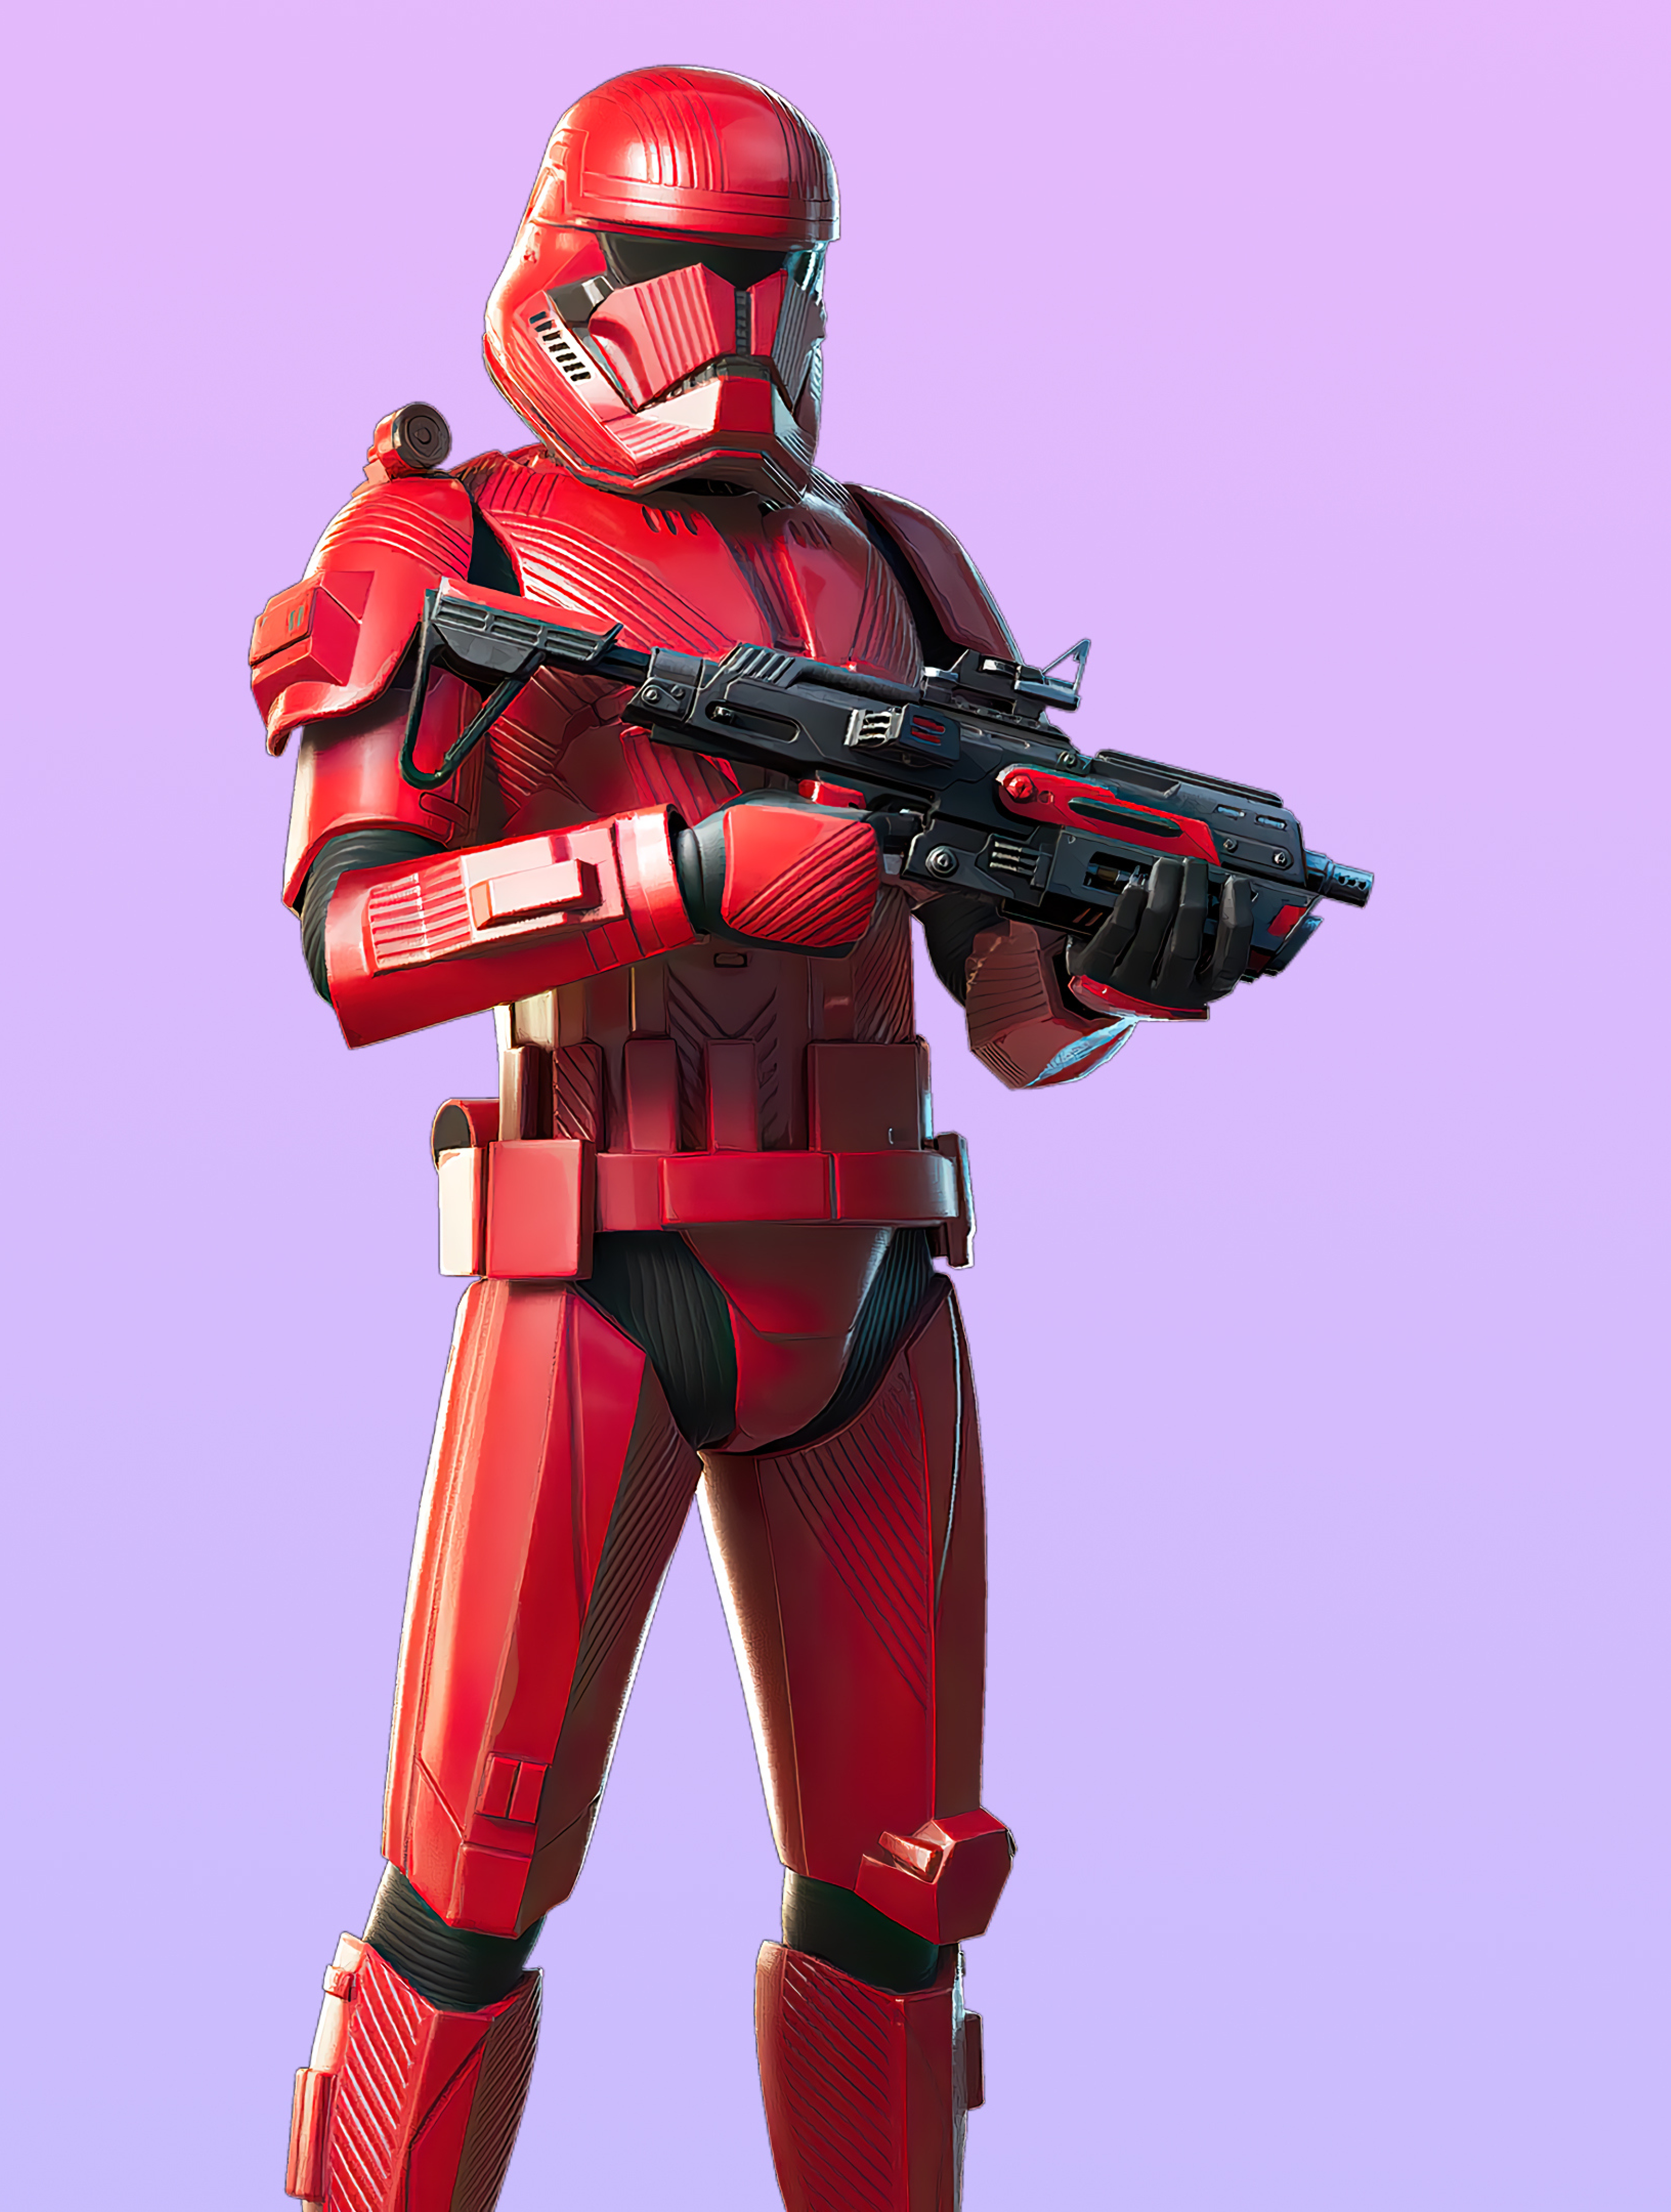 Download wallpapers 4k Sith Trooper red grunge background Fortnite  vortex Fortnite characters Sith Trooper Skin Fortnite Battle Royale Sith  Trooper Fortnite for desktop free Pictures for desktop free